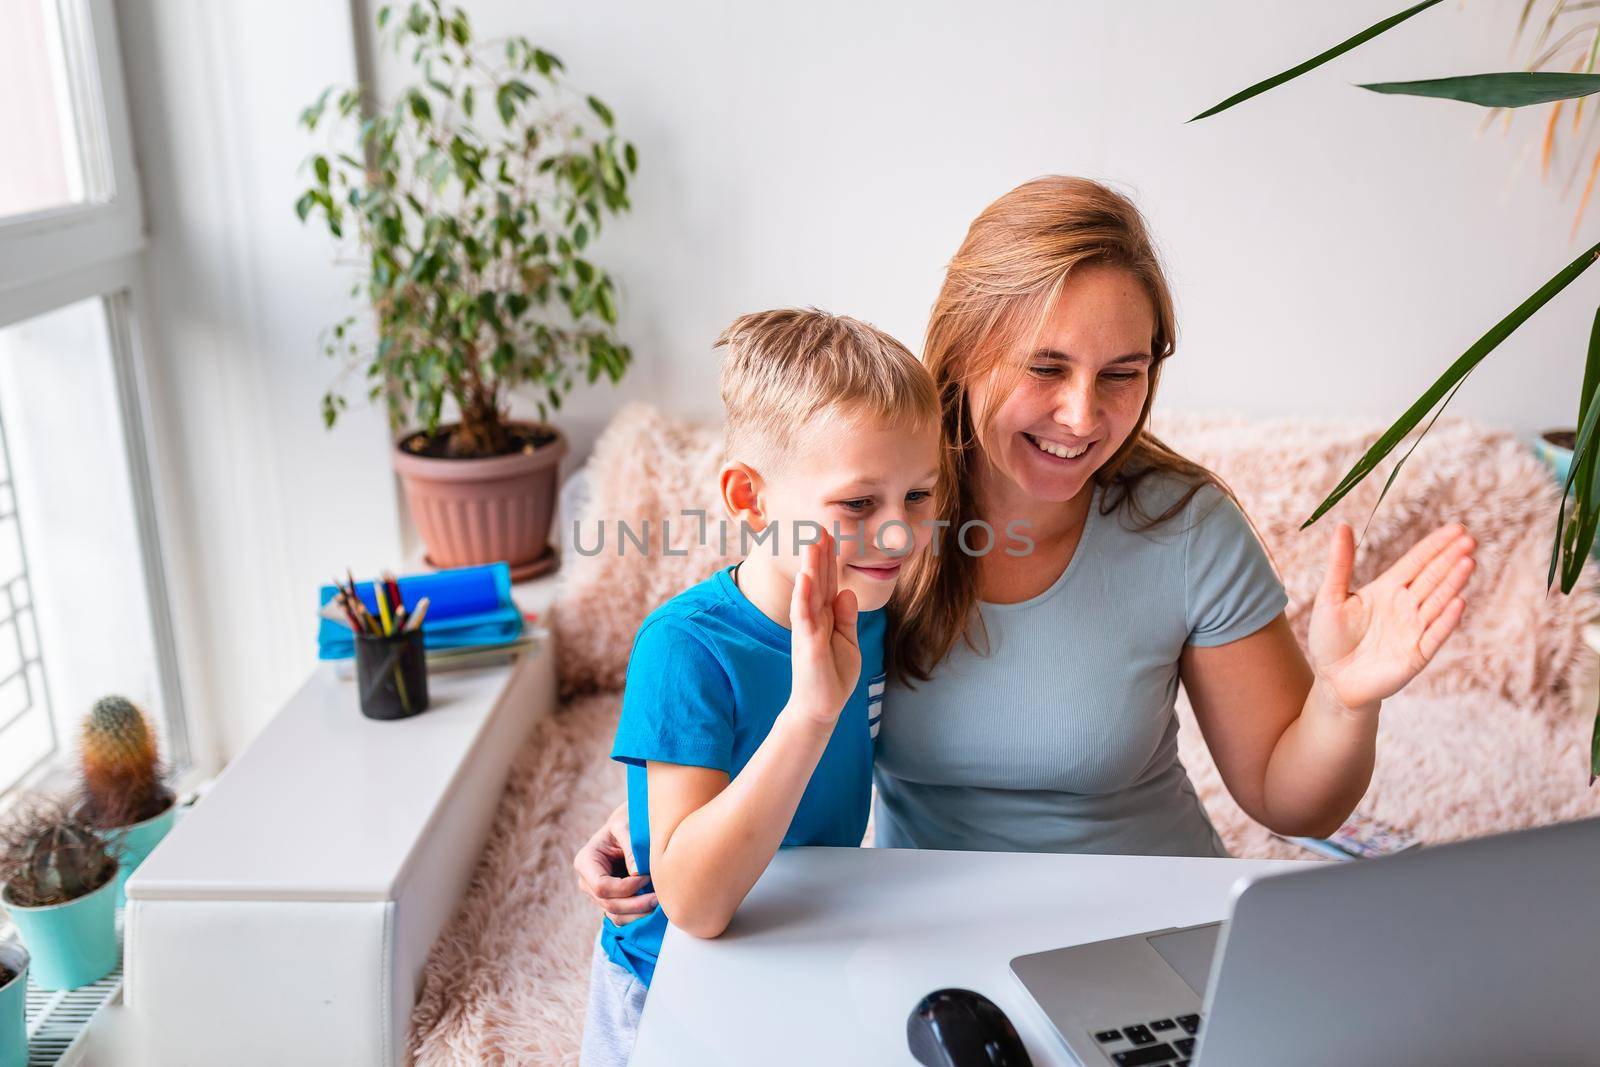 Mother with kid trying to work from home during quarantine. Stay at home, work from home concept during coronavirus pandemic